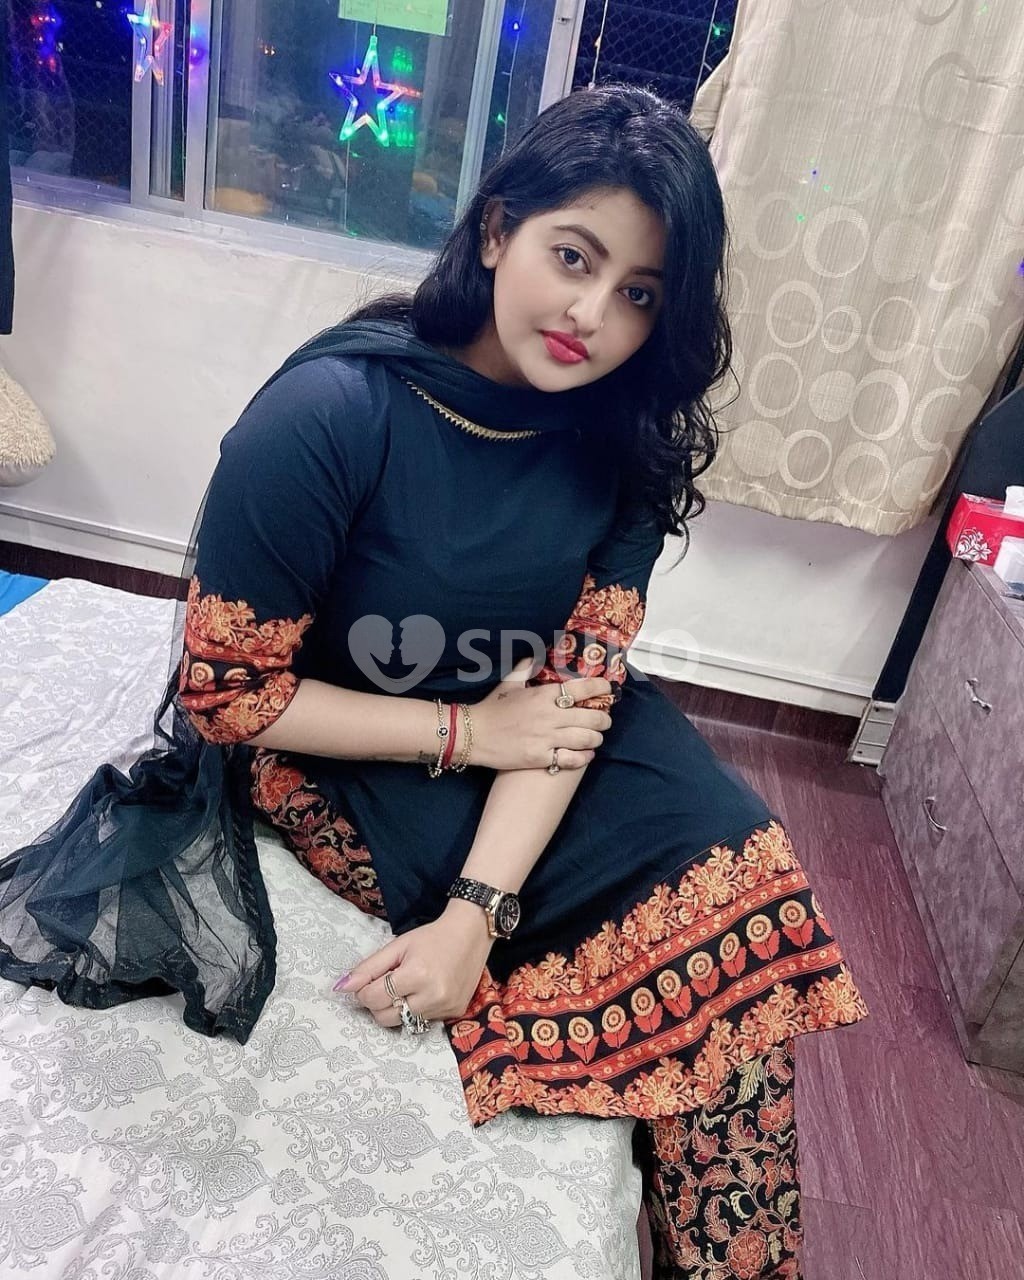 Myself vidya call girl in pathankot independent doorstep housewife college girls full safe and secure sarvice available